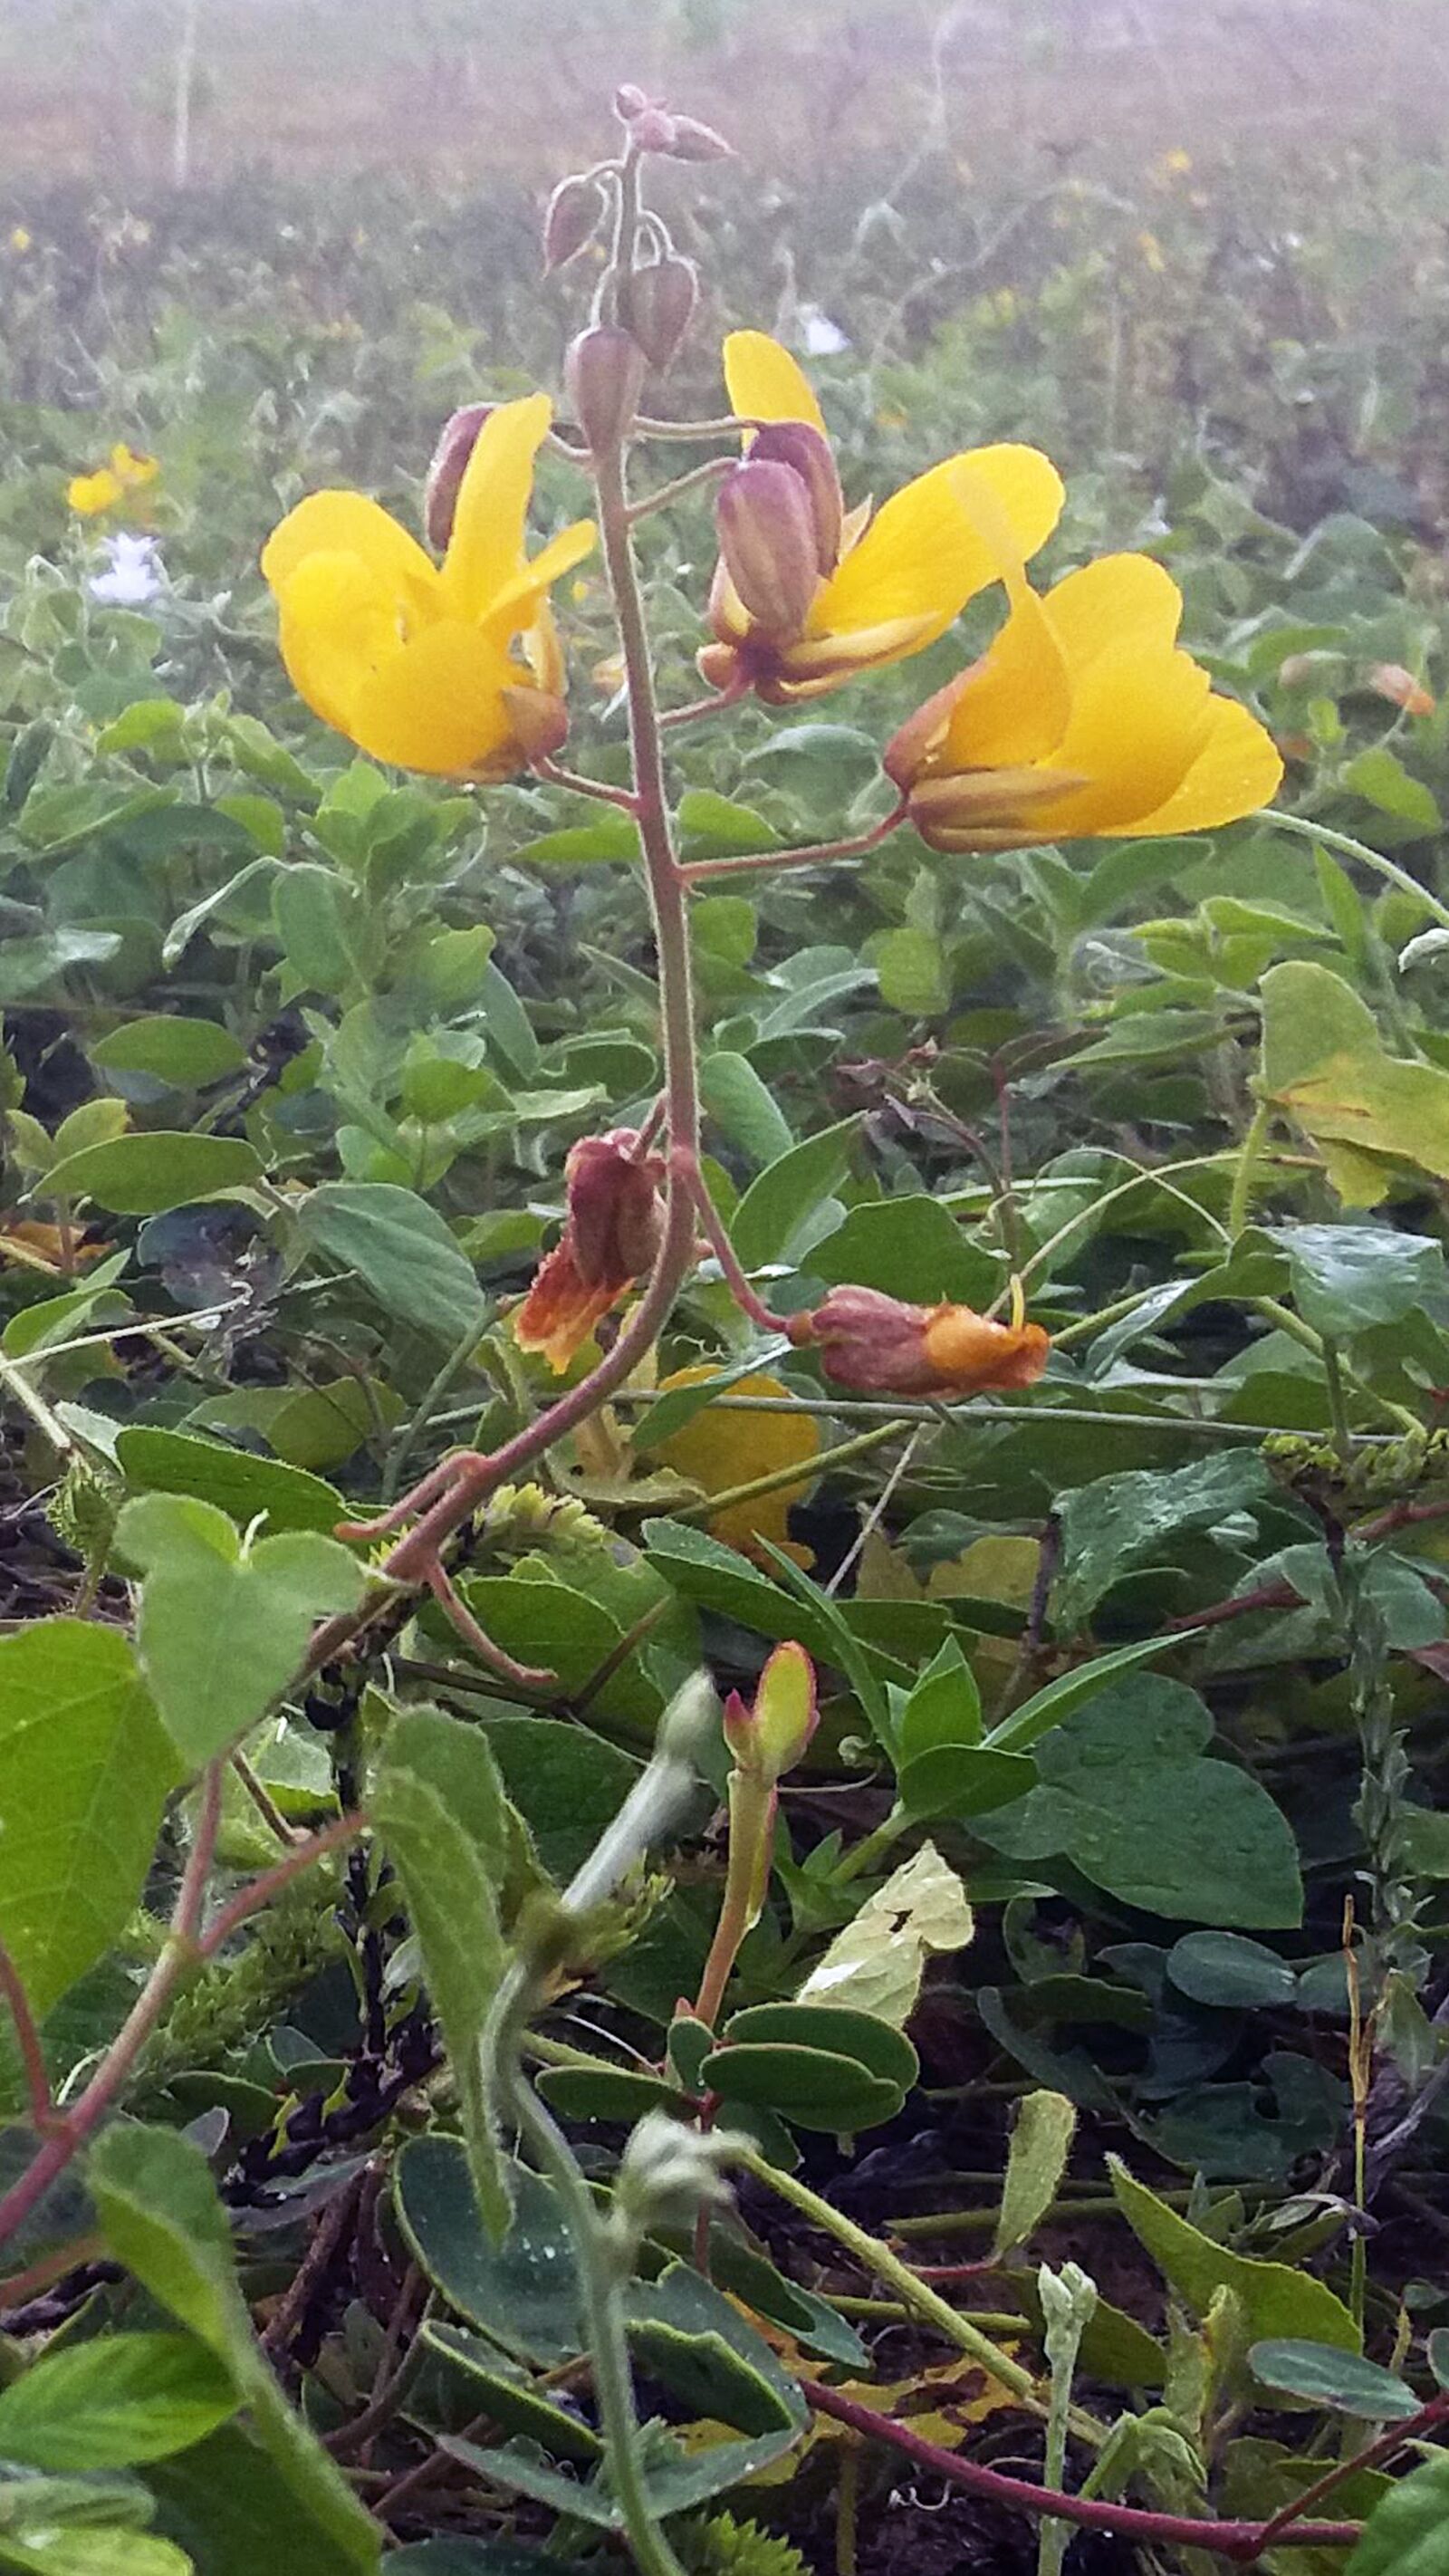 Samsung Galaxy A9 Pro sample photo. Flower, nature, plant photography